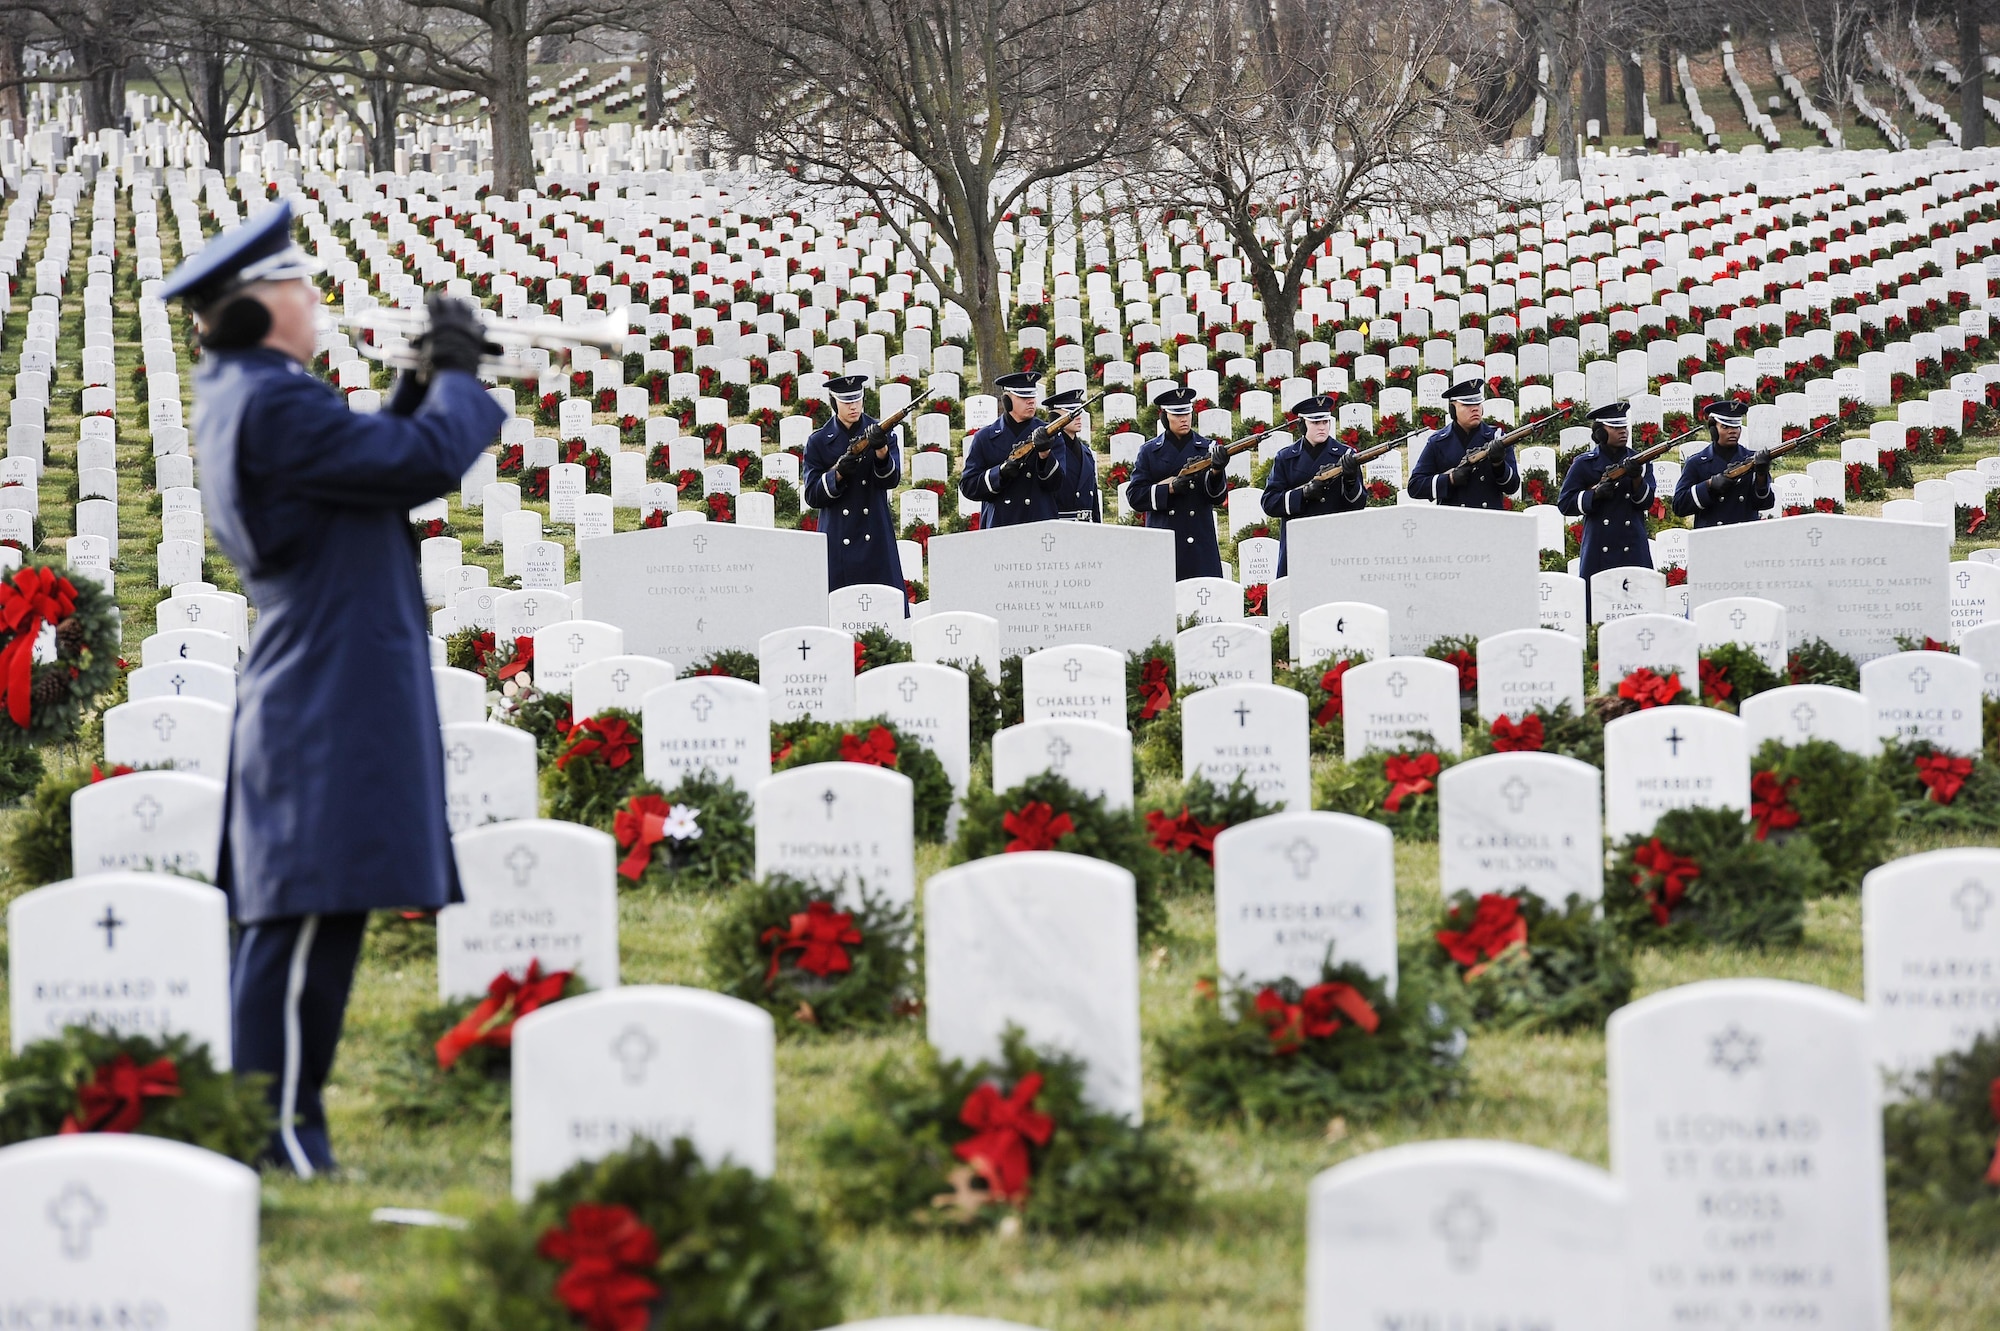 The U.S. Air Force Honor Guard performs a 21-gun salute during the interment of Maj. Troy Gilbert at Arlington National Cemetery, Va., Dec. 19, 2016. Gilbert’s family and more than 300 friends, colleagues and wingmen attended the funeral to pay their respects and honor the fallen Airman. (U.S. Air Force photo/Staff Sgt. Jannelle McRae)